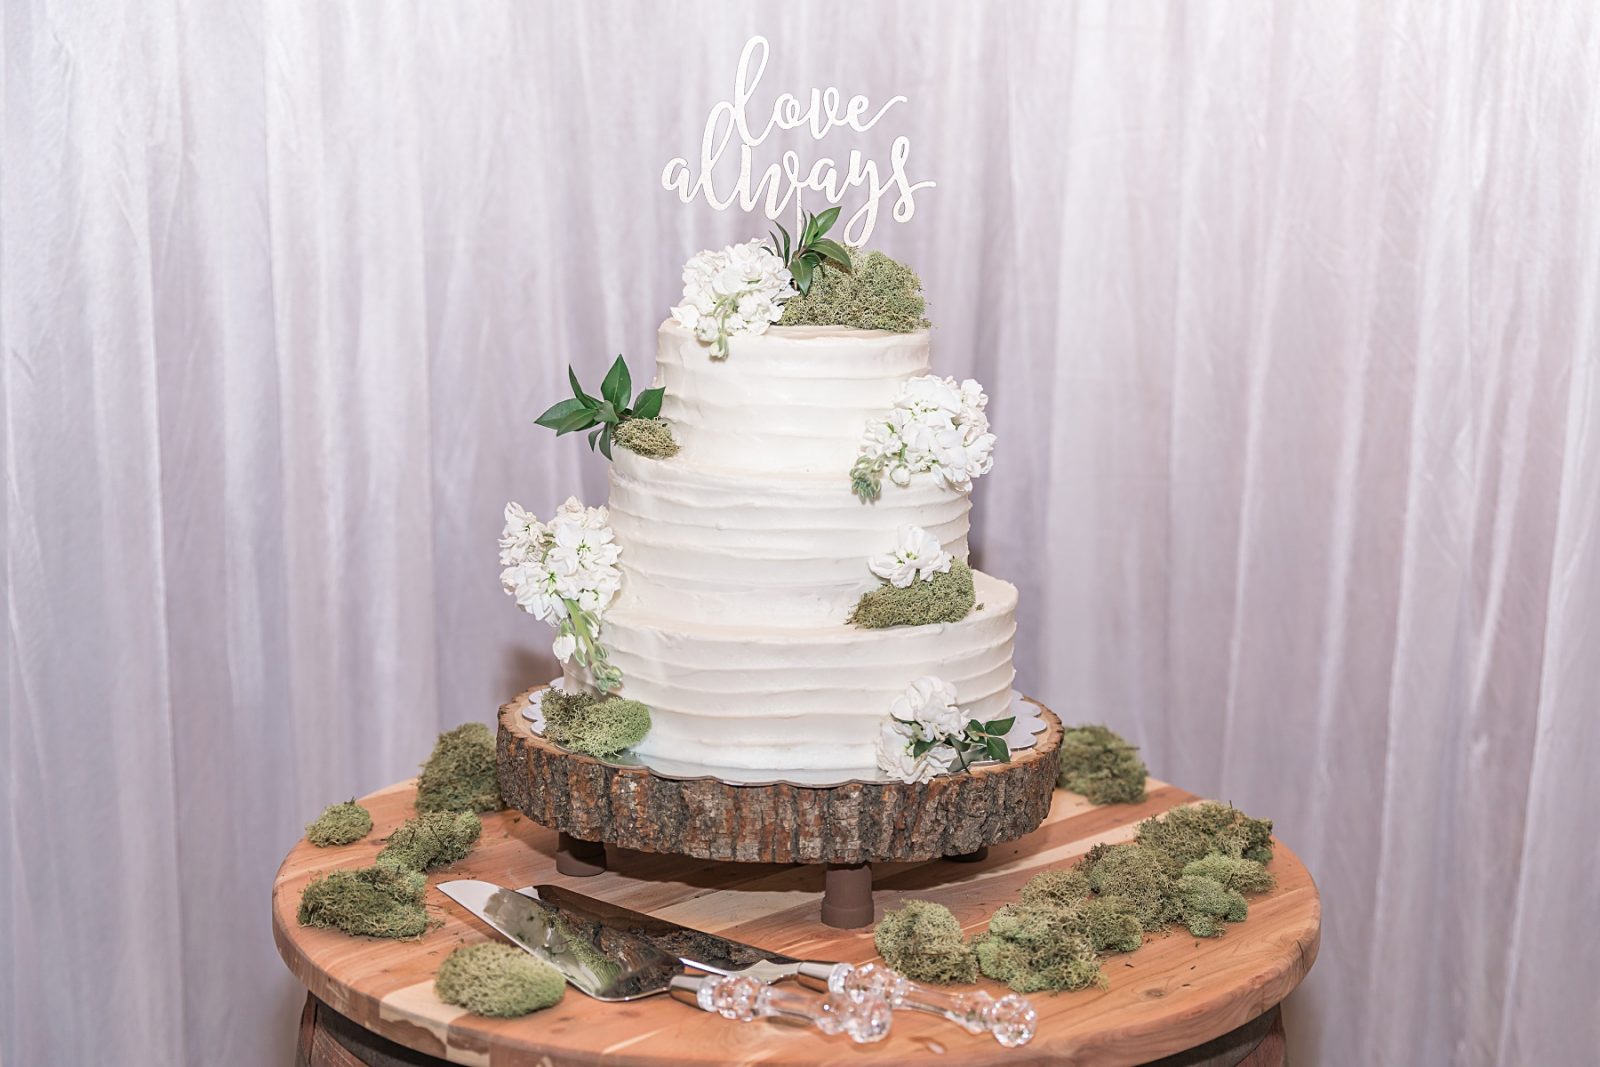 Wedding photography by Diana Gramlich, 3-tier white wedding cake with white flowers and moss